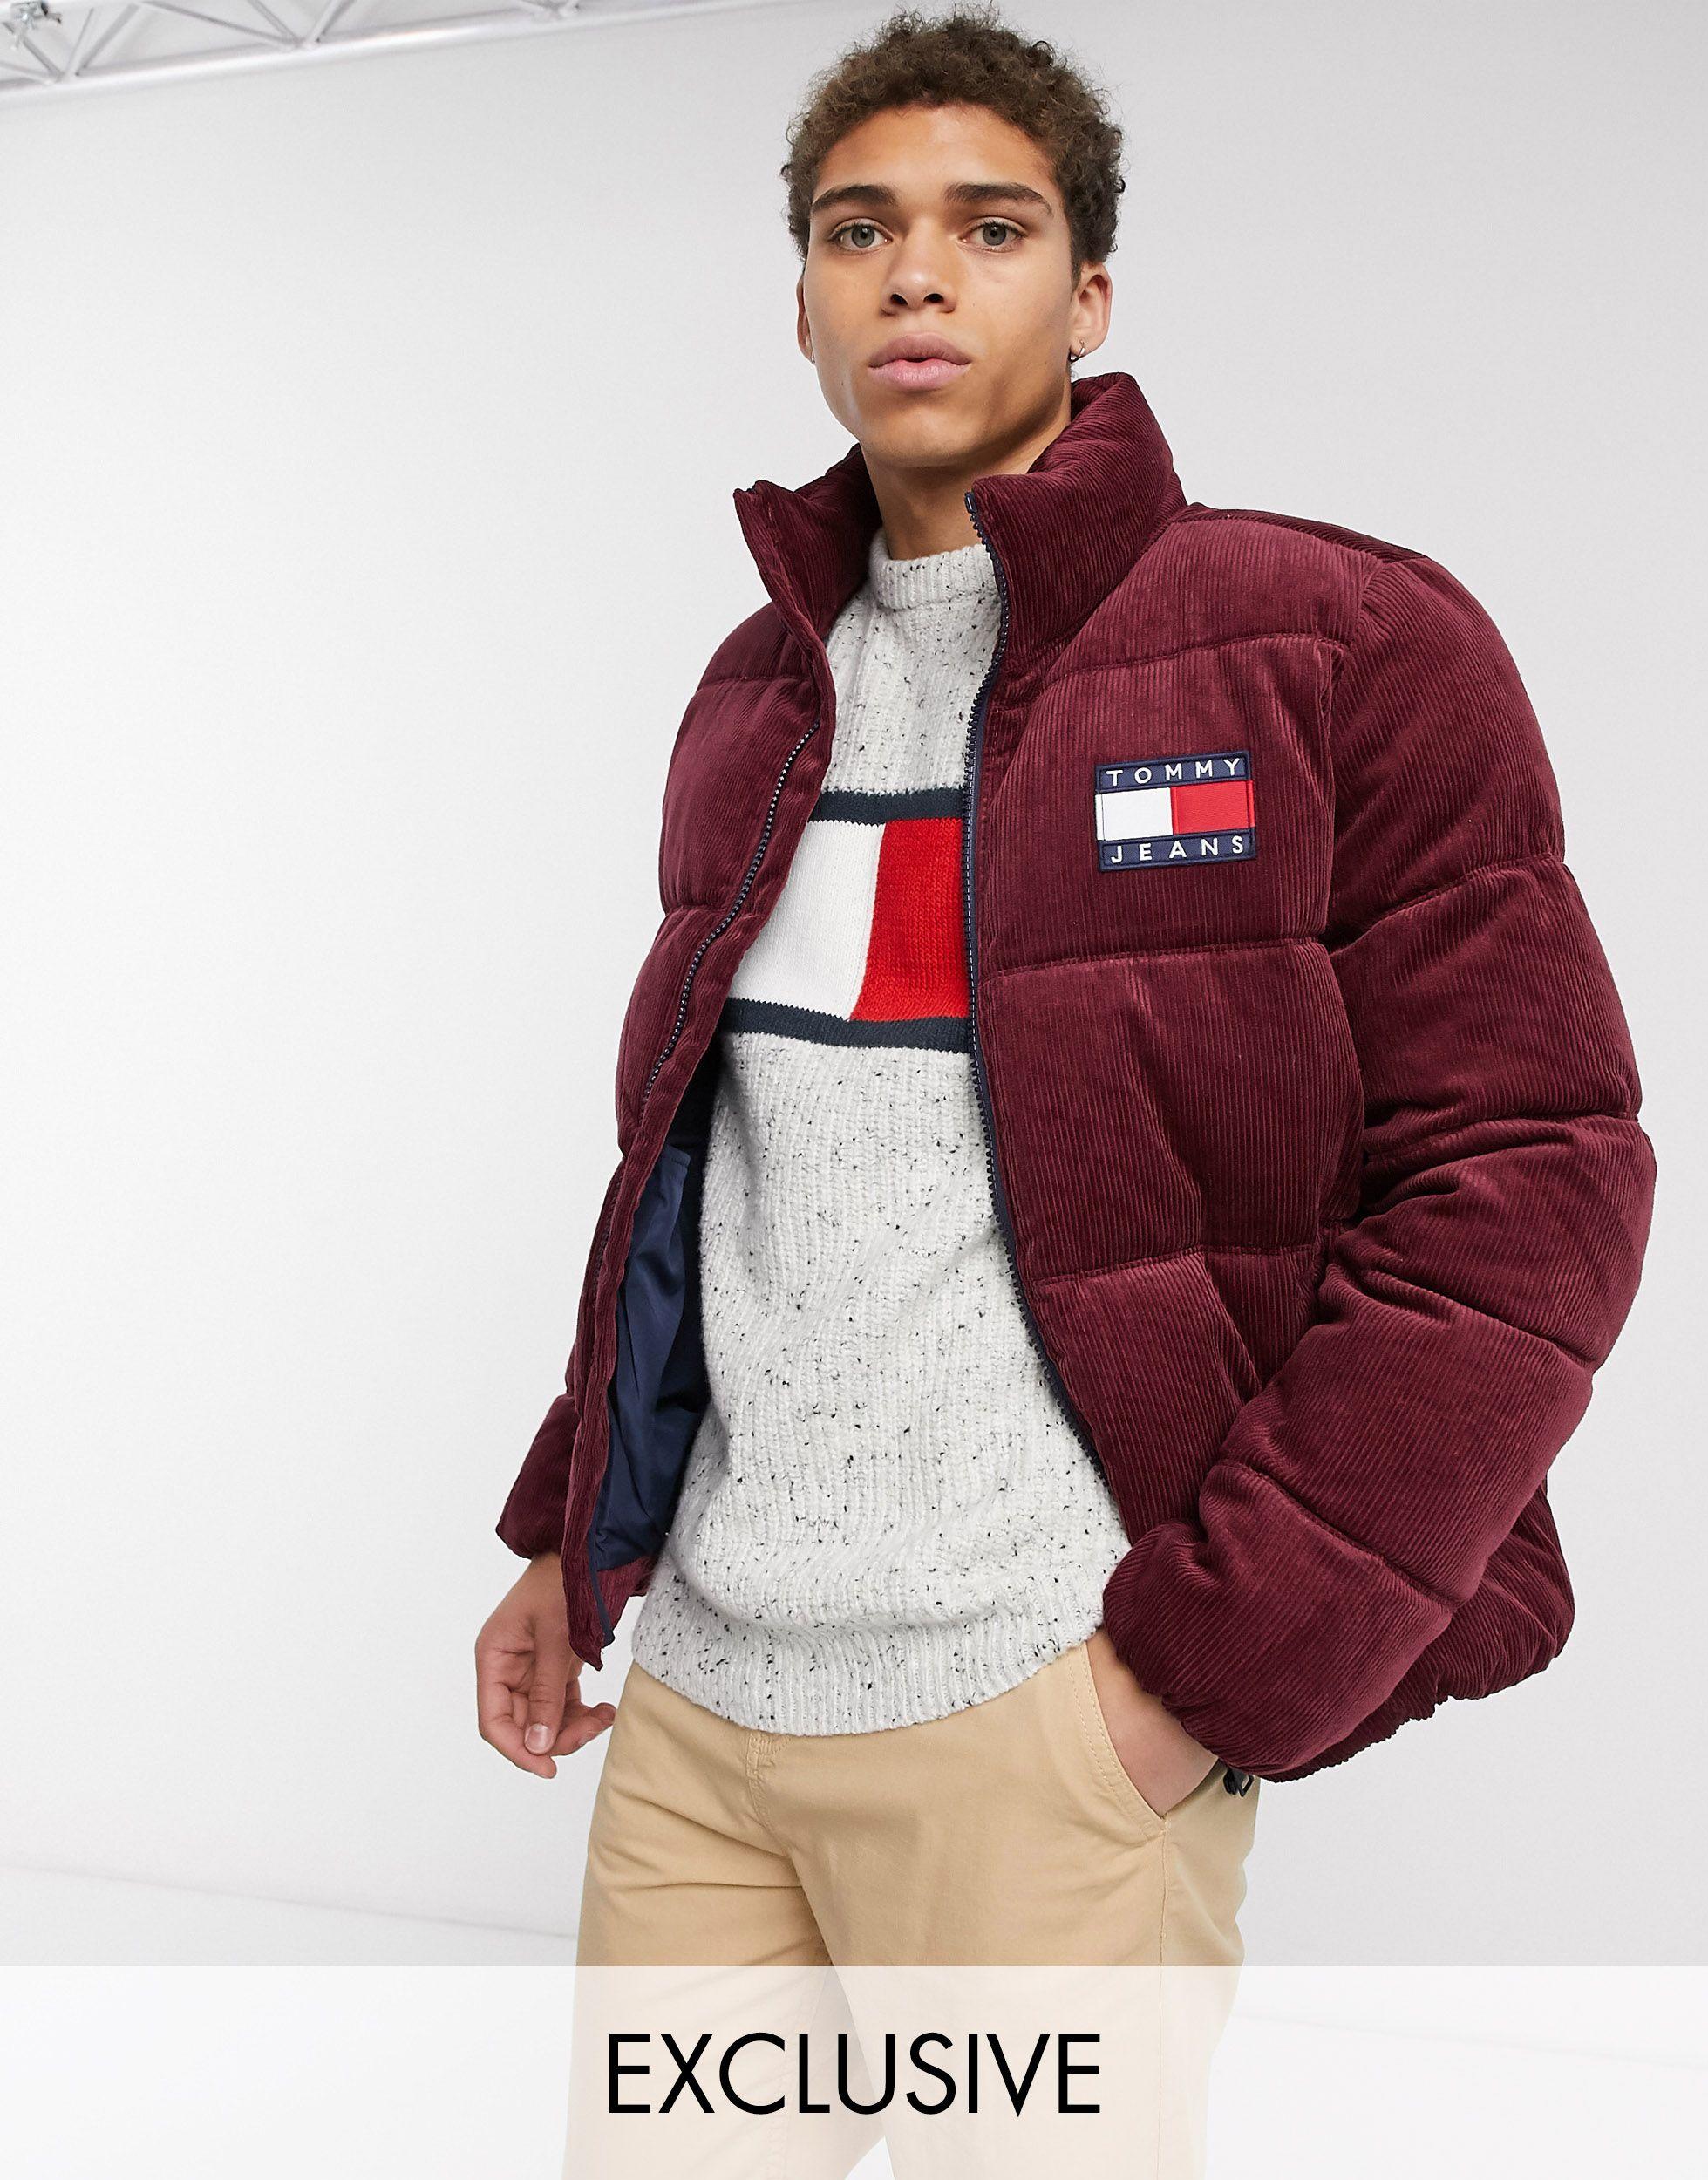 Tommy Hilfiger Denim Exclusive To Asos Cord Puffer Jacket in Burgundy (Red)  for Men | Lyst Australia